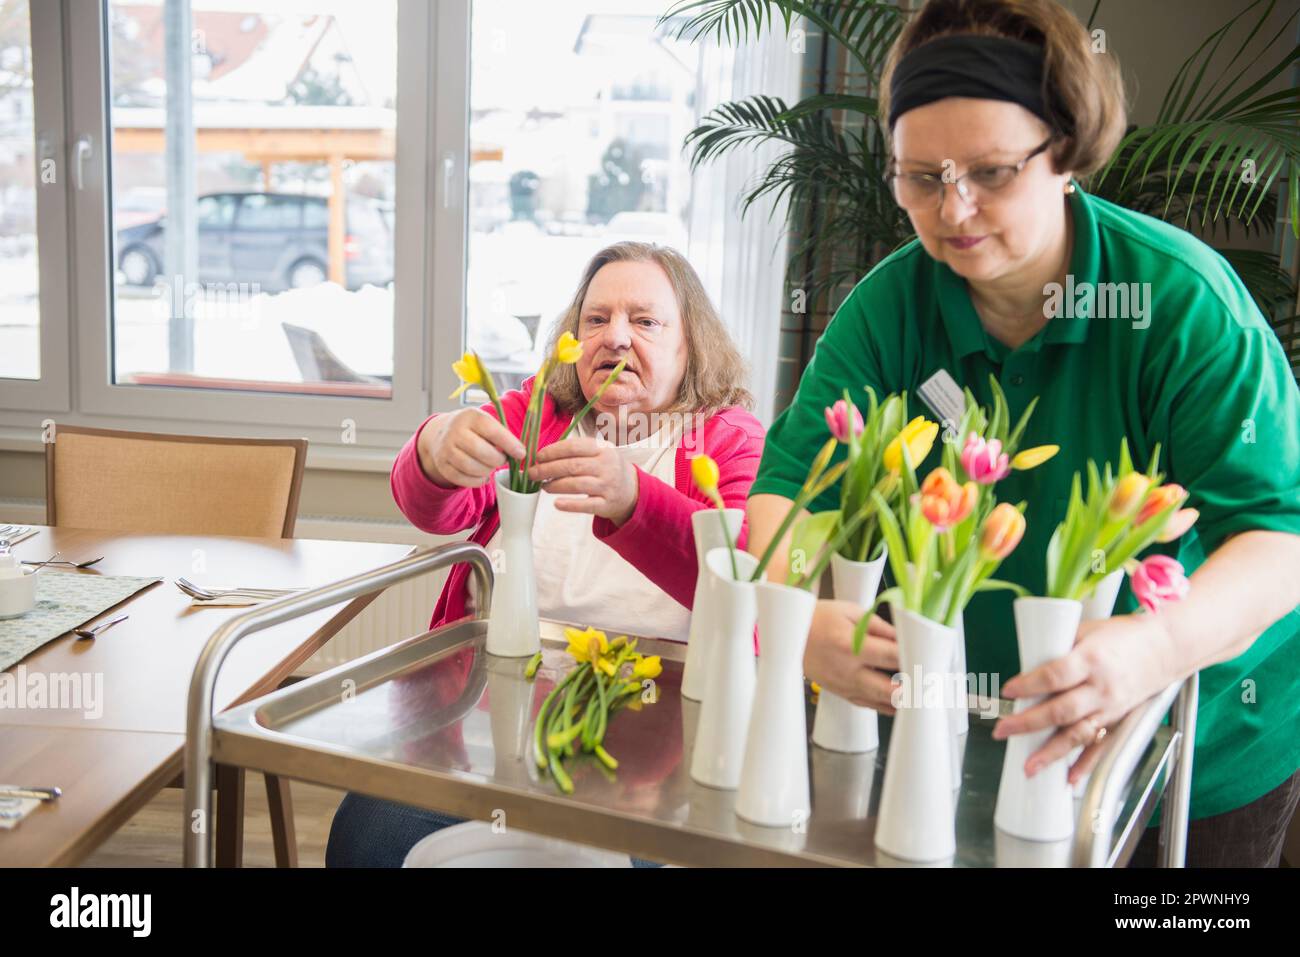 Caretaker and senior woman arranging flowers and vases at rest home Stock Photo